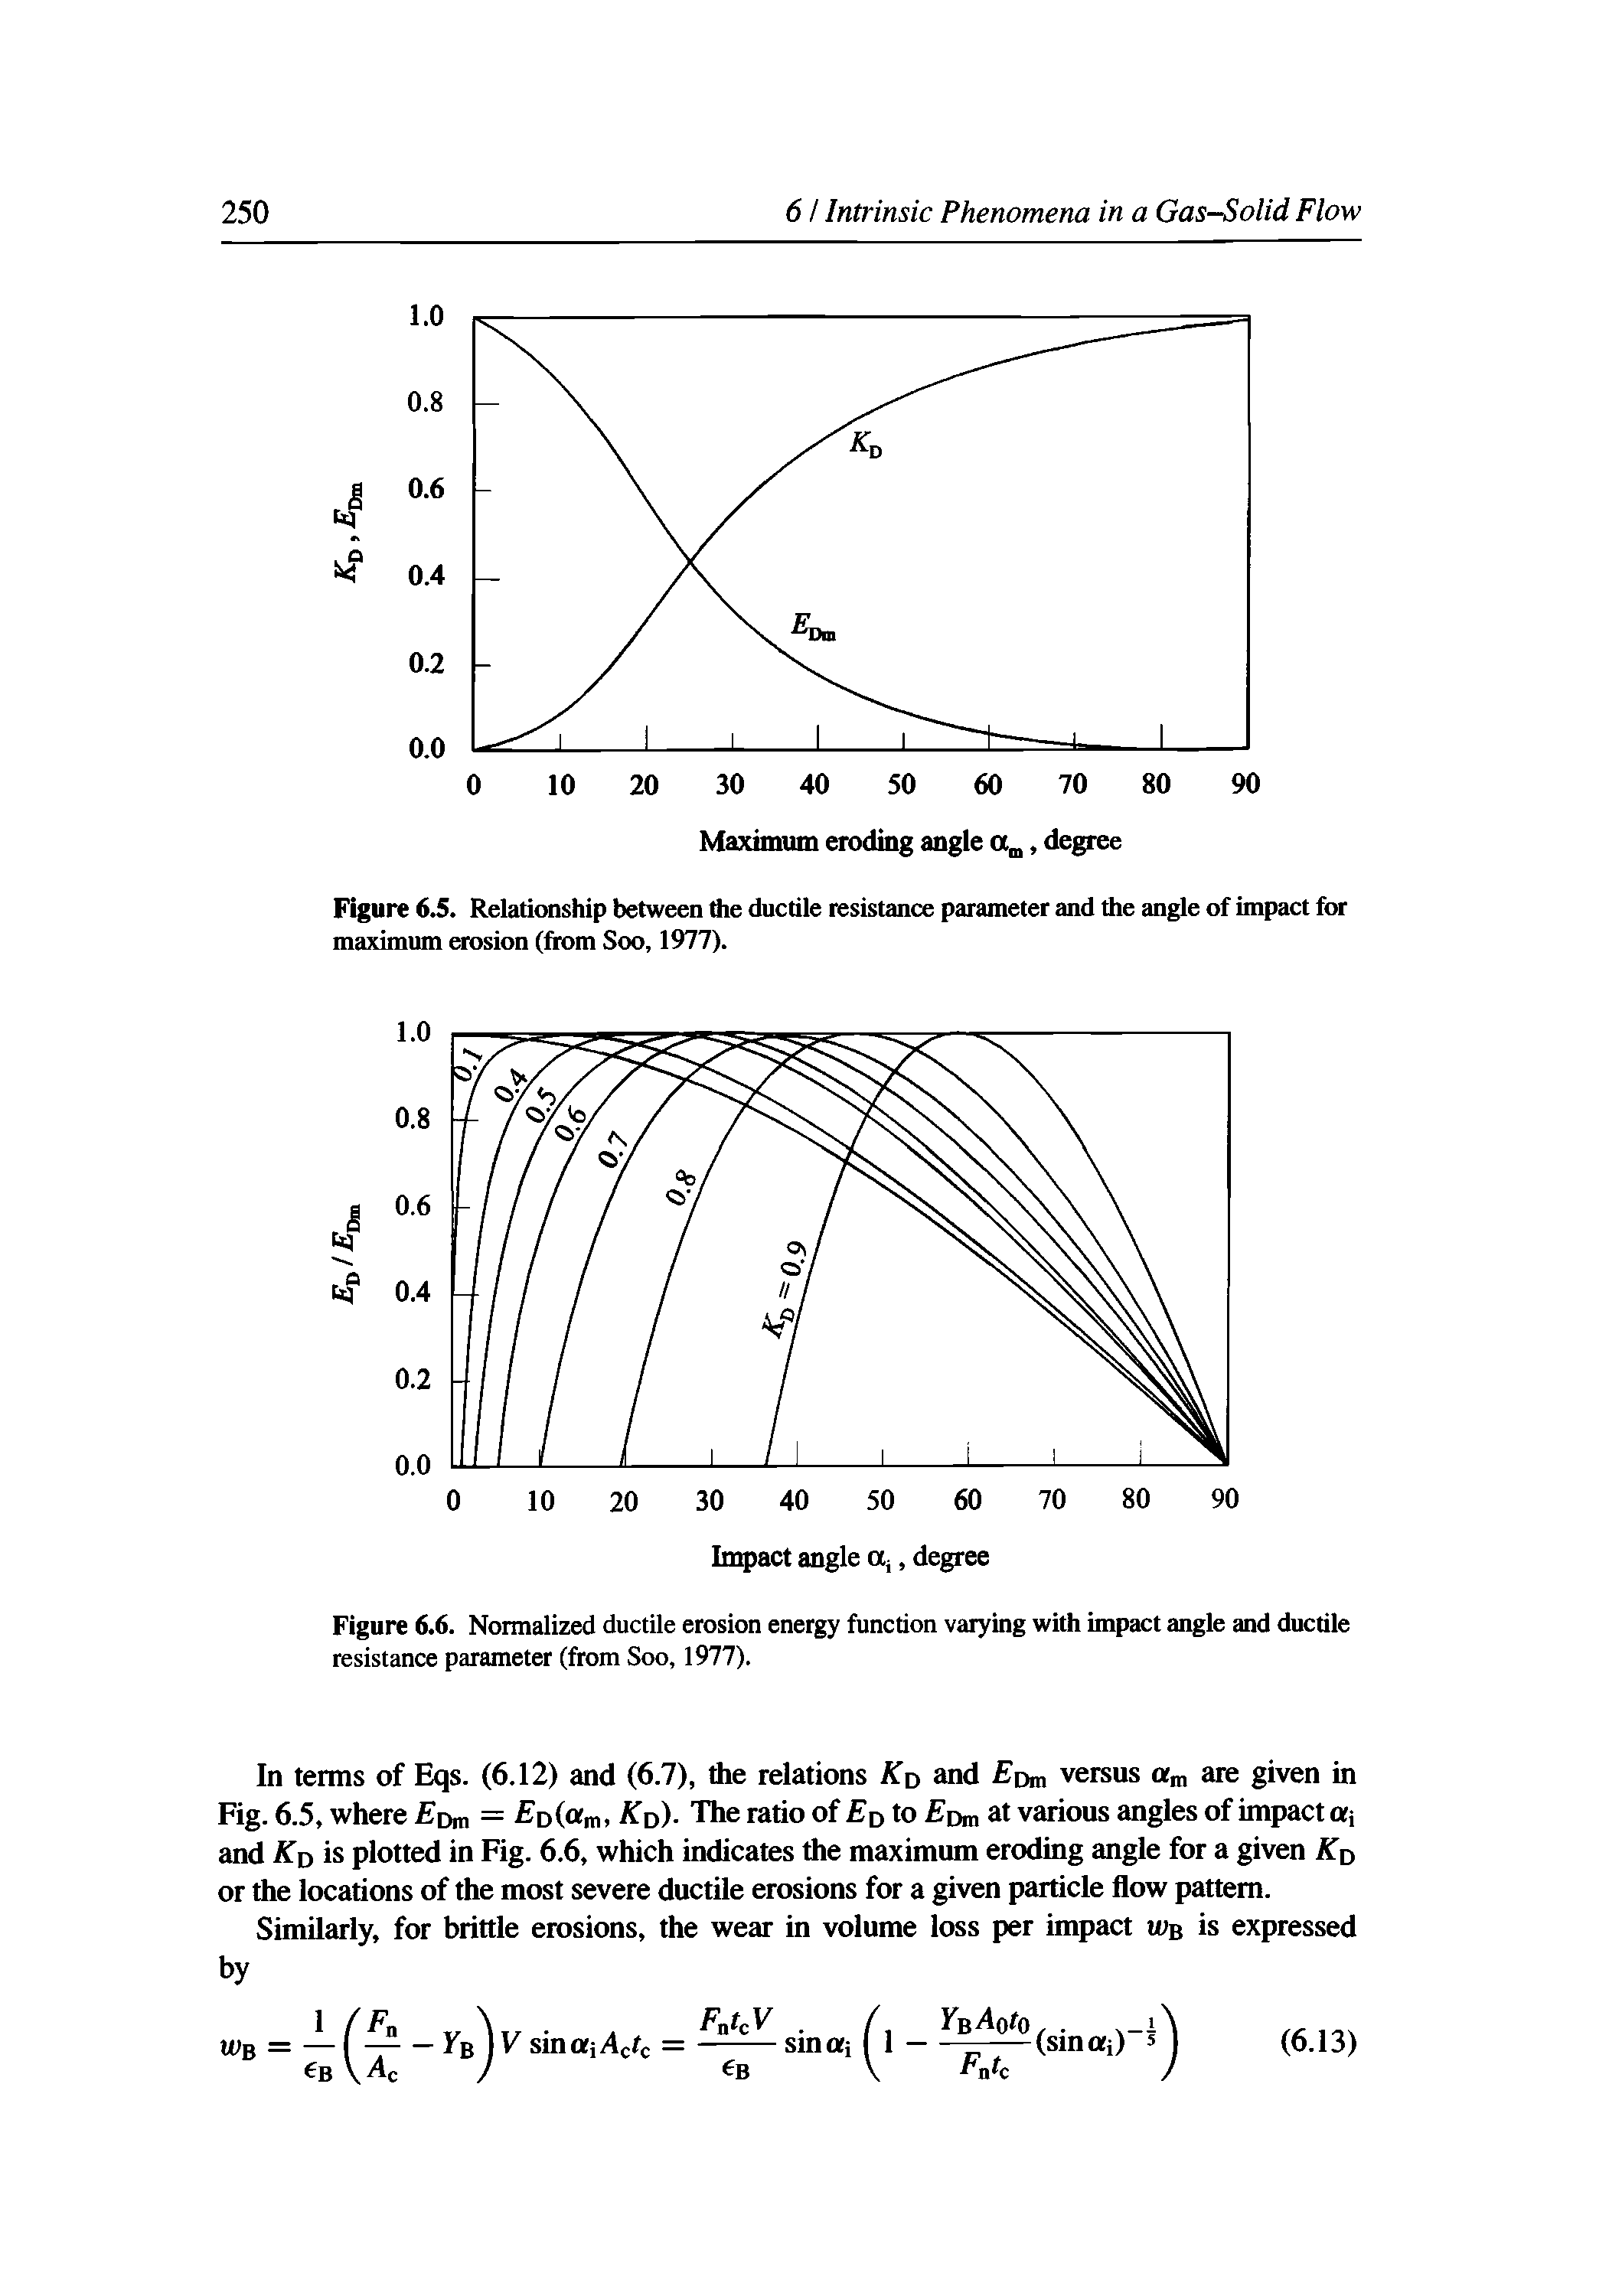 Figure 6.5. Relationship between die ductile resistance parameter and the angle of impact for maximum erosion (from Soo, 1977).